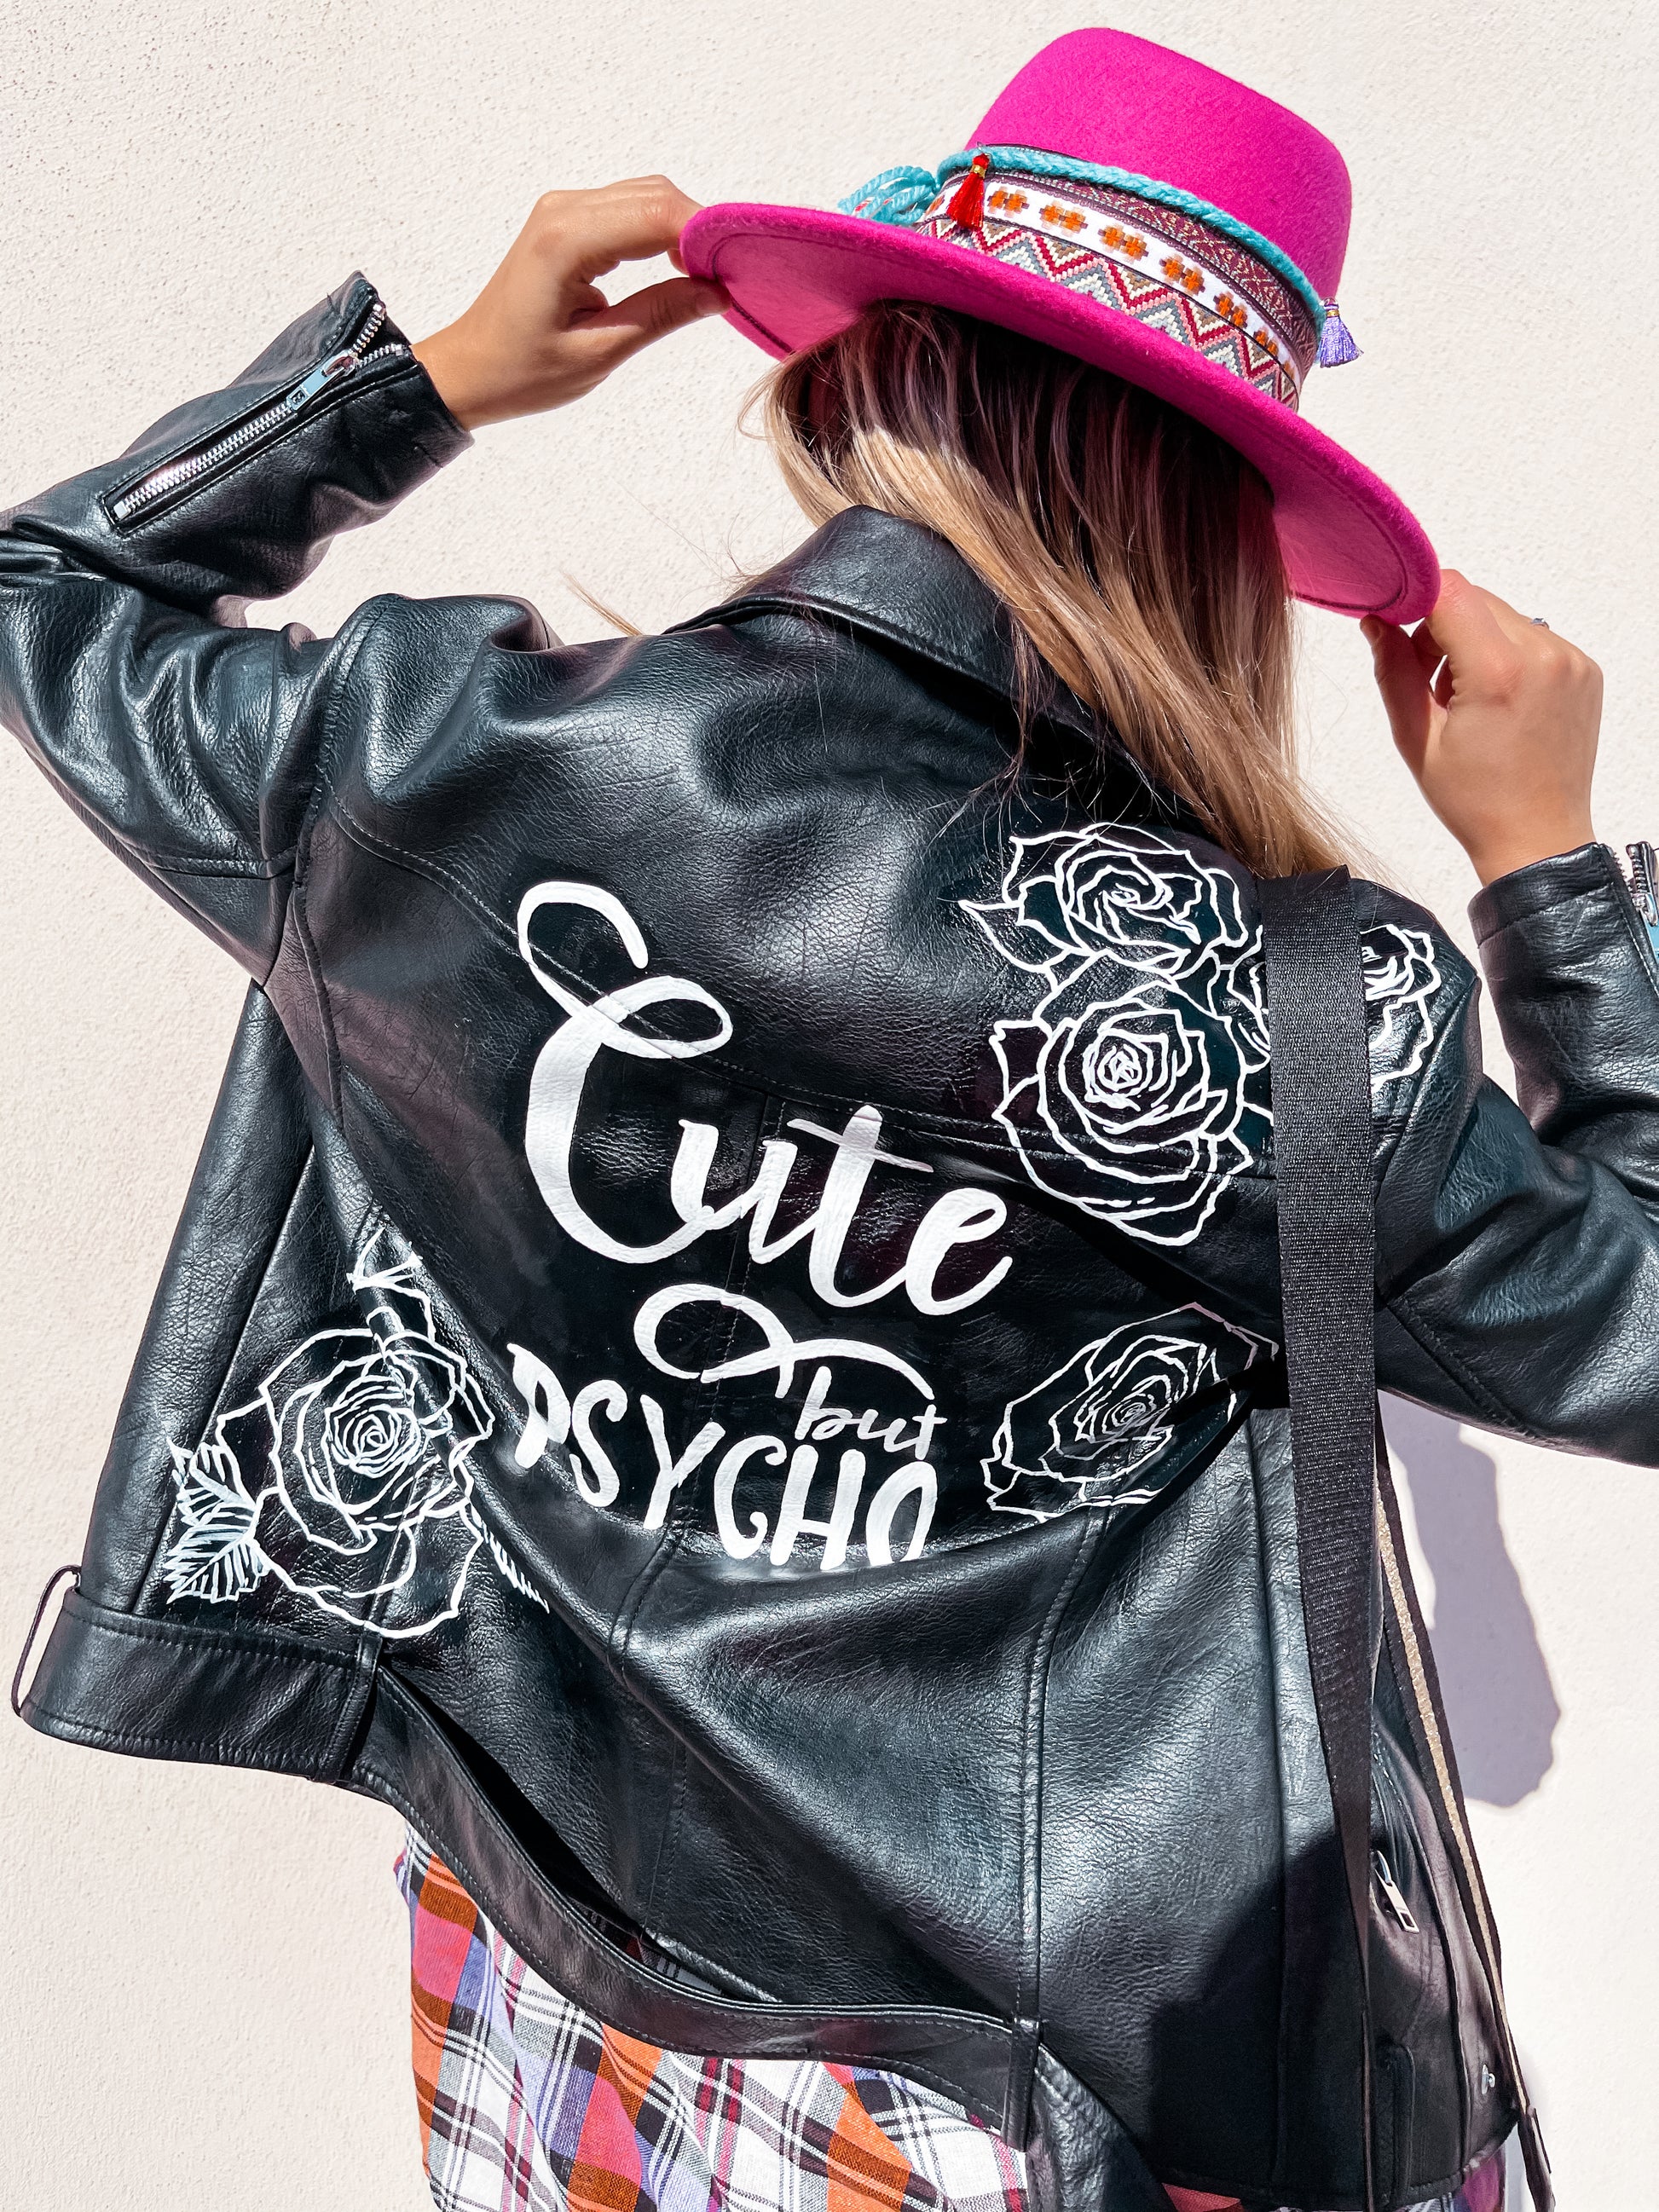 CUTE LEATHER JACKET - Youcust